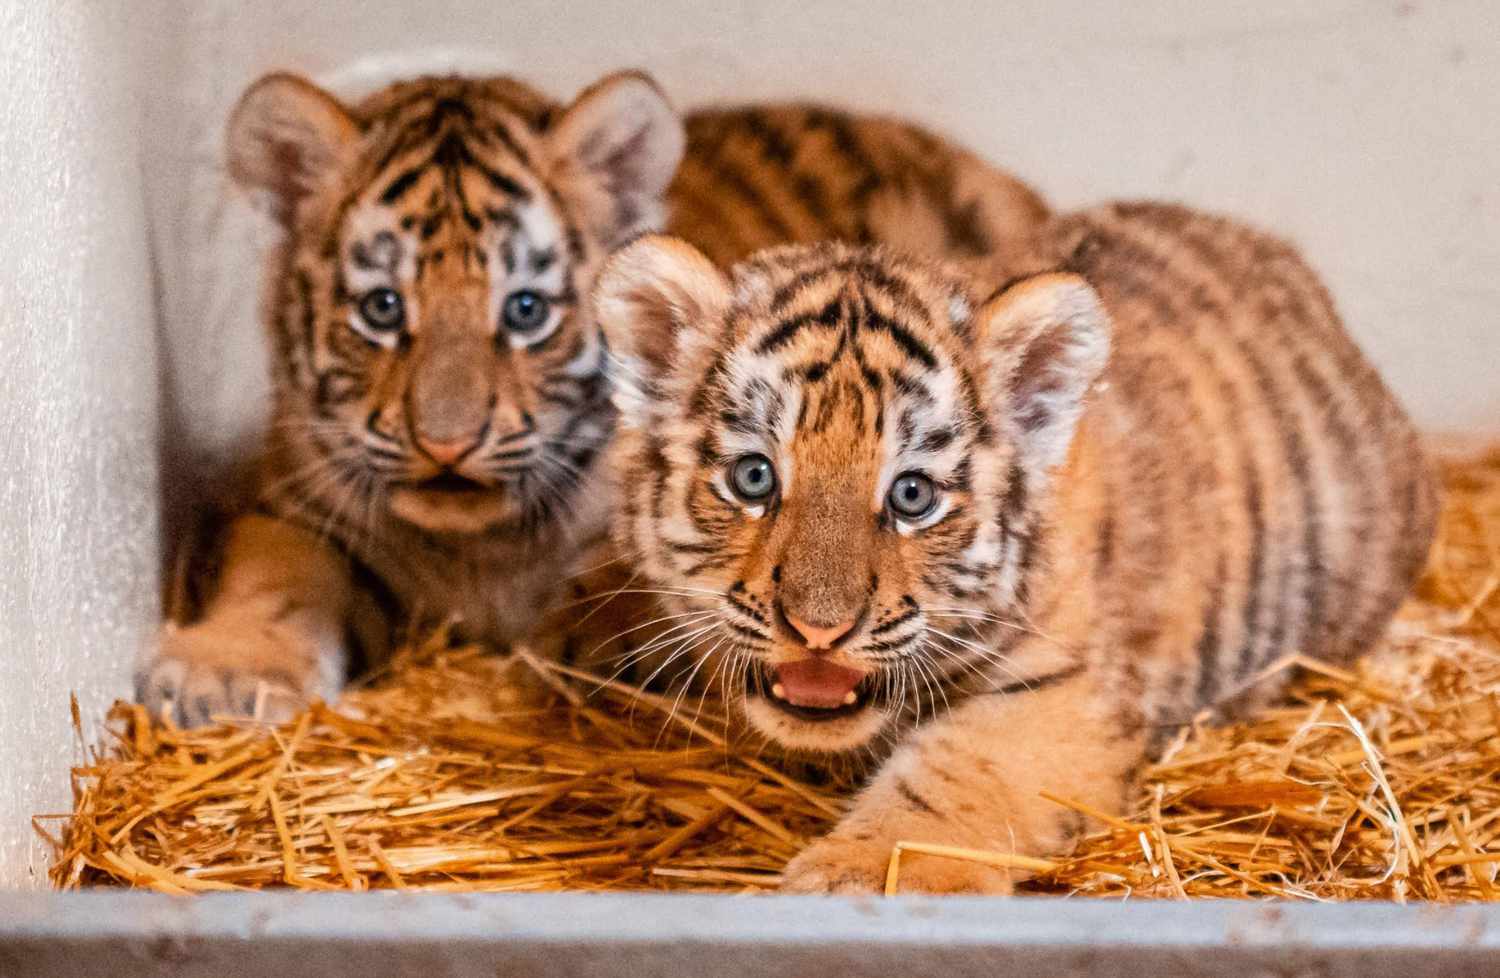 Toledo Zoo has two beautiful new Amur tiger cubs